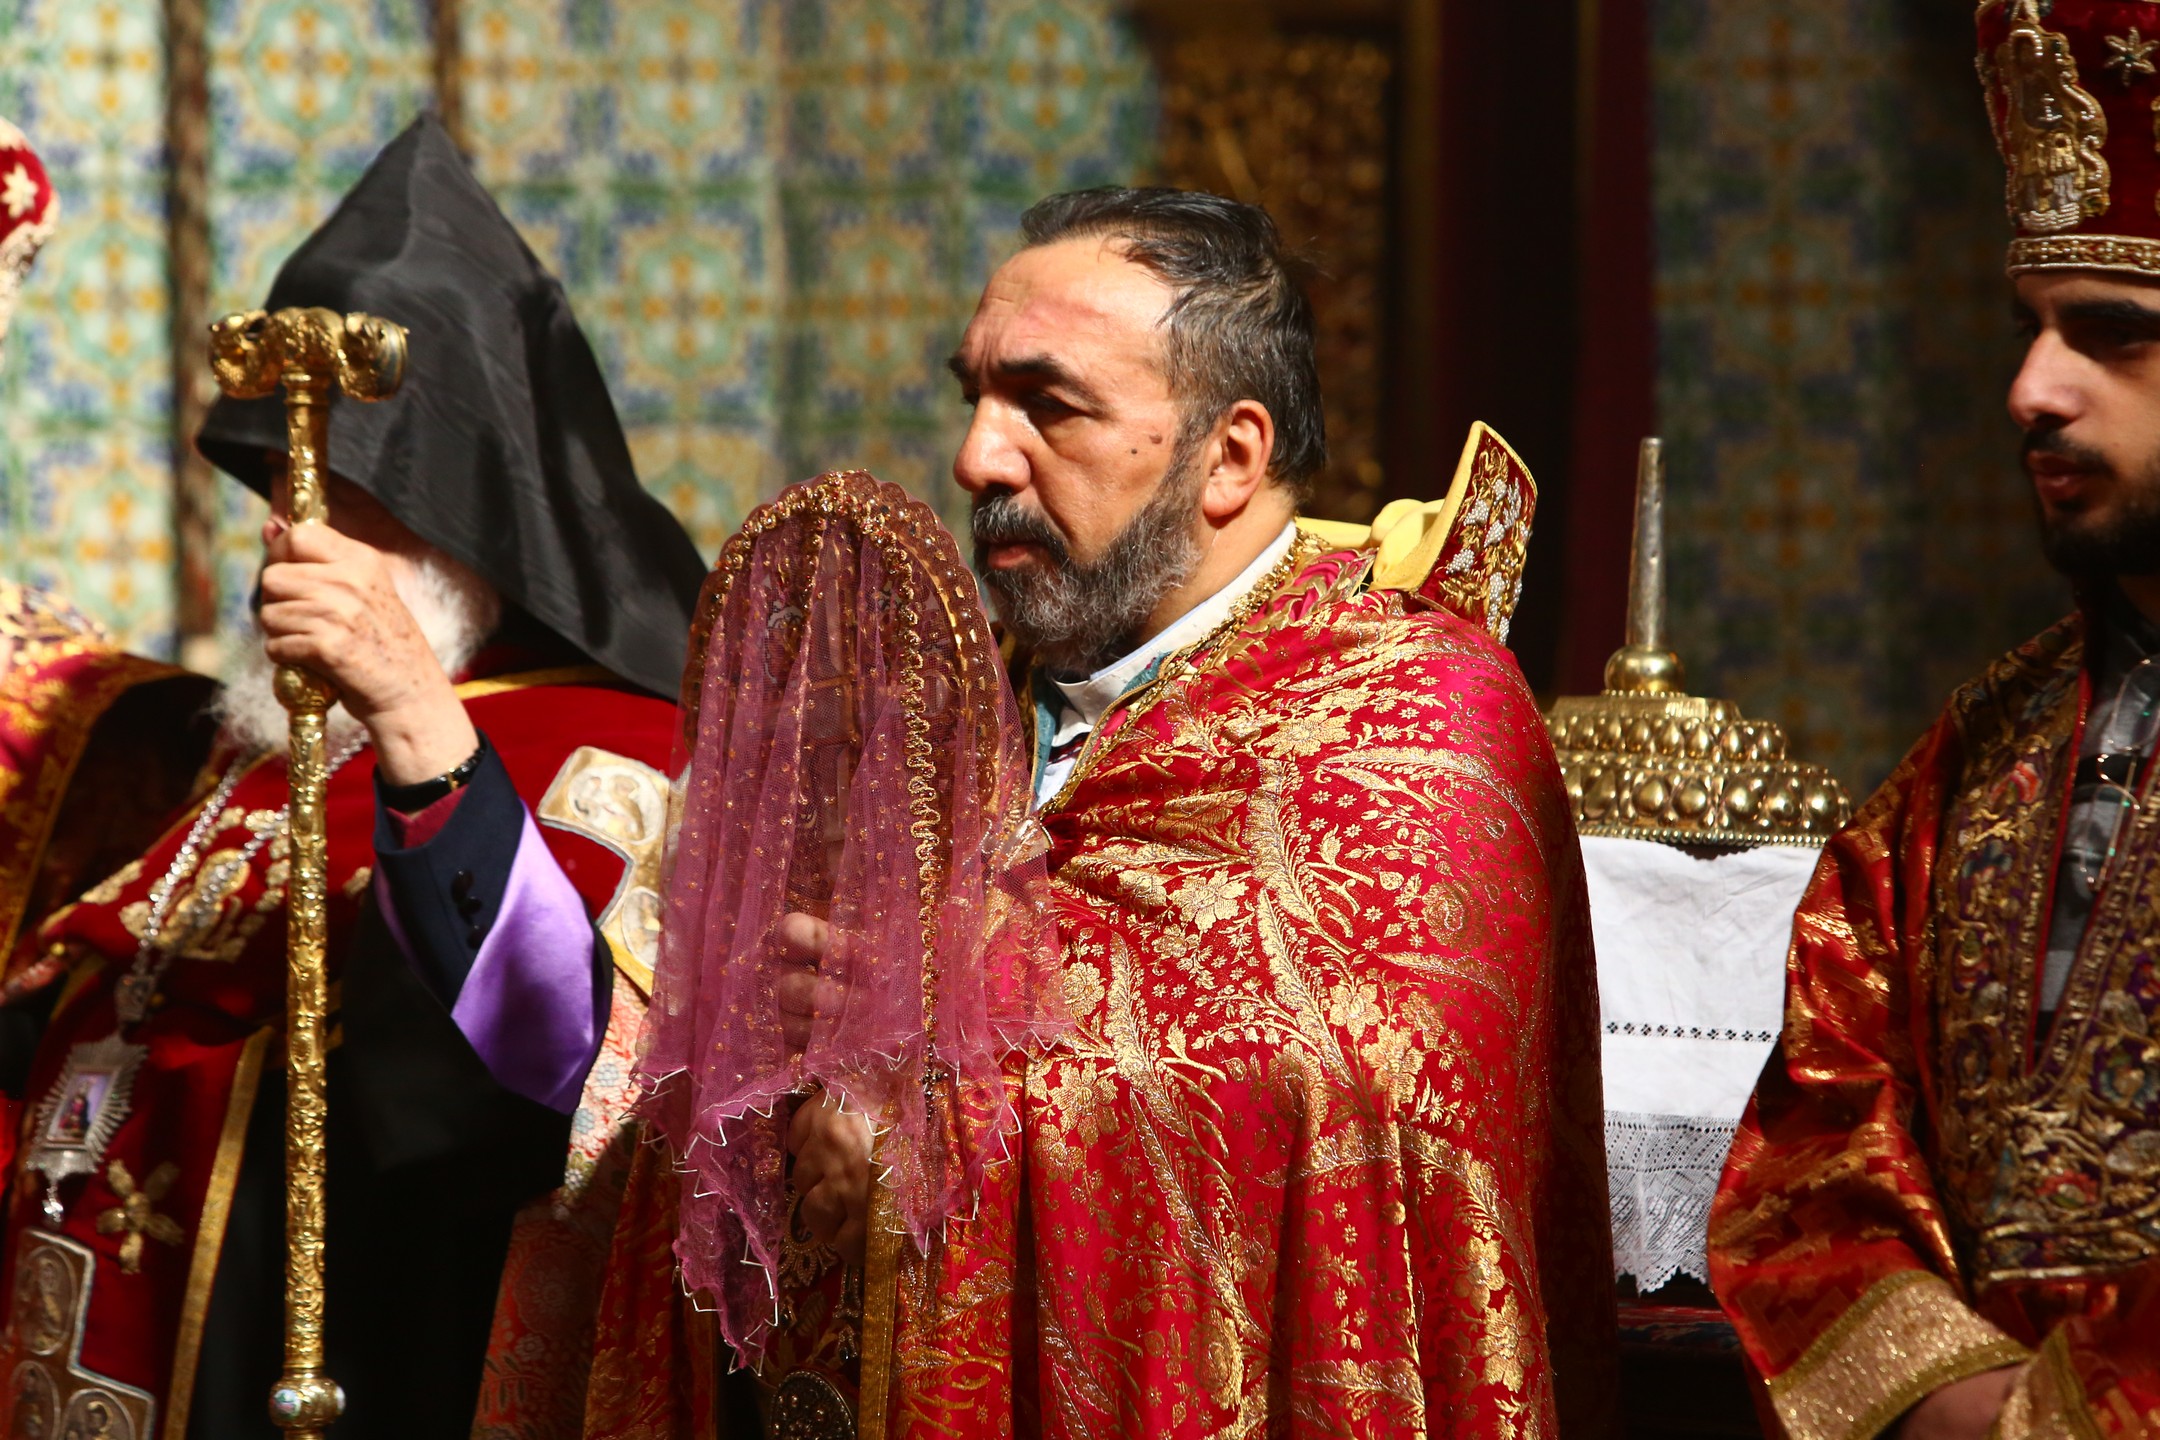 Feast of the Sons of Zebedee – St. James & St. John observed at the Armenian Orthodox Patriarchate of Jerusalem